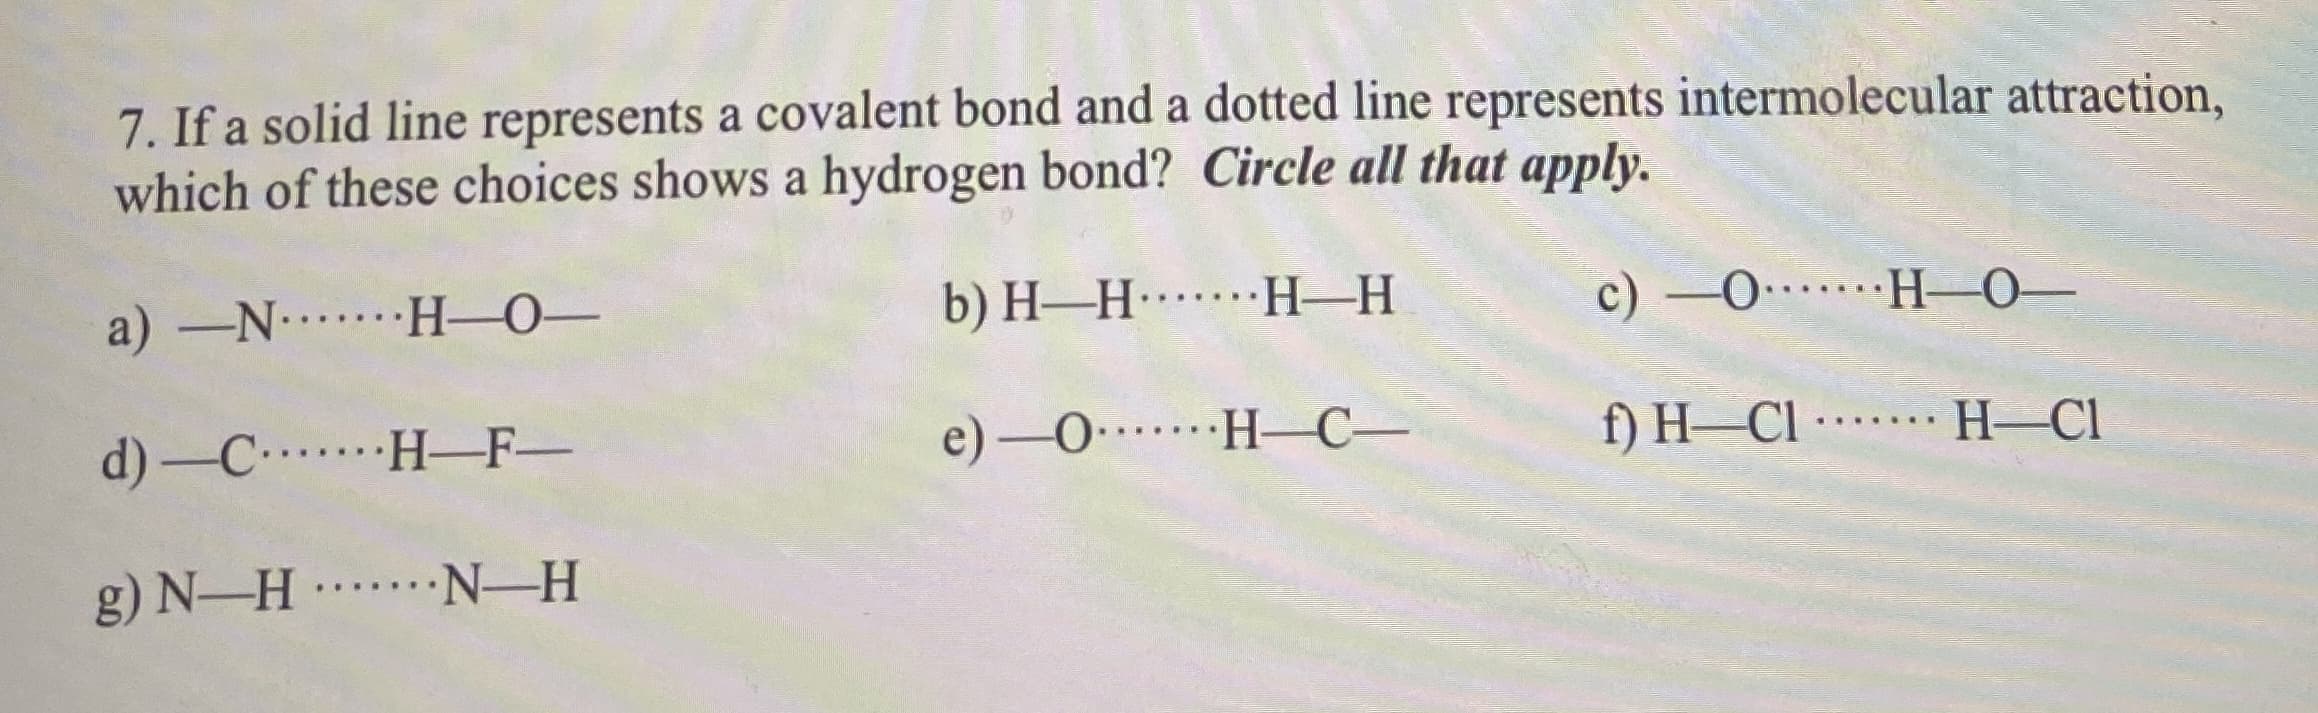 7. If a solid line represents a covalent bond and a dotted line represents intermolecular attraction,
which of these choices shows a hydrogen bond? Circle all that apply.
a) -N H-0-
b) H-H H-H
c) -0 H-0-
...
d) -C H-F-
e) -0 H–C-
f) H–CI --
H-Cl
.... ...
g) N-H N-H
... ..
